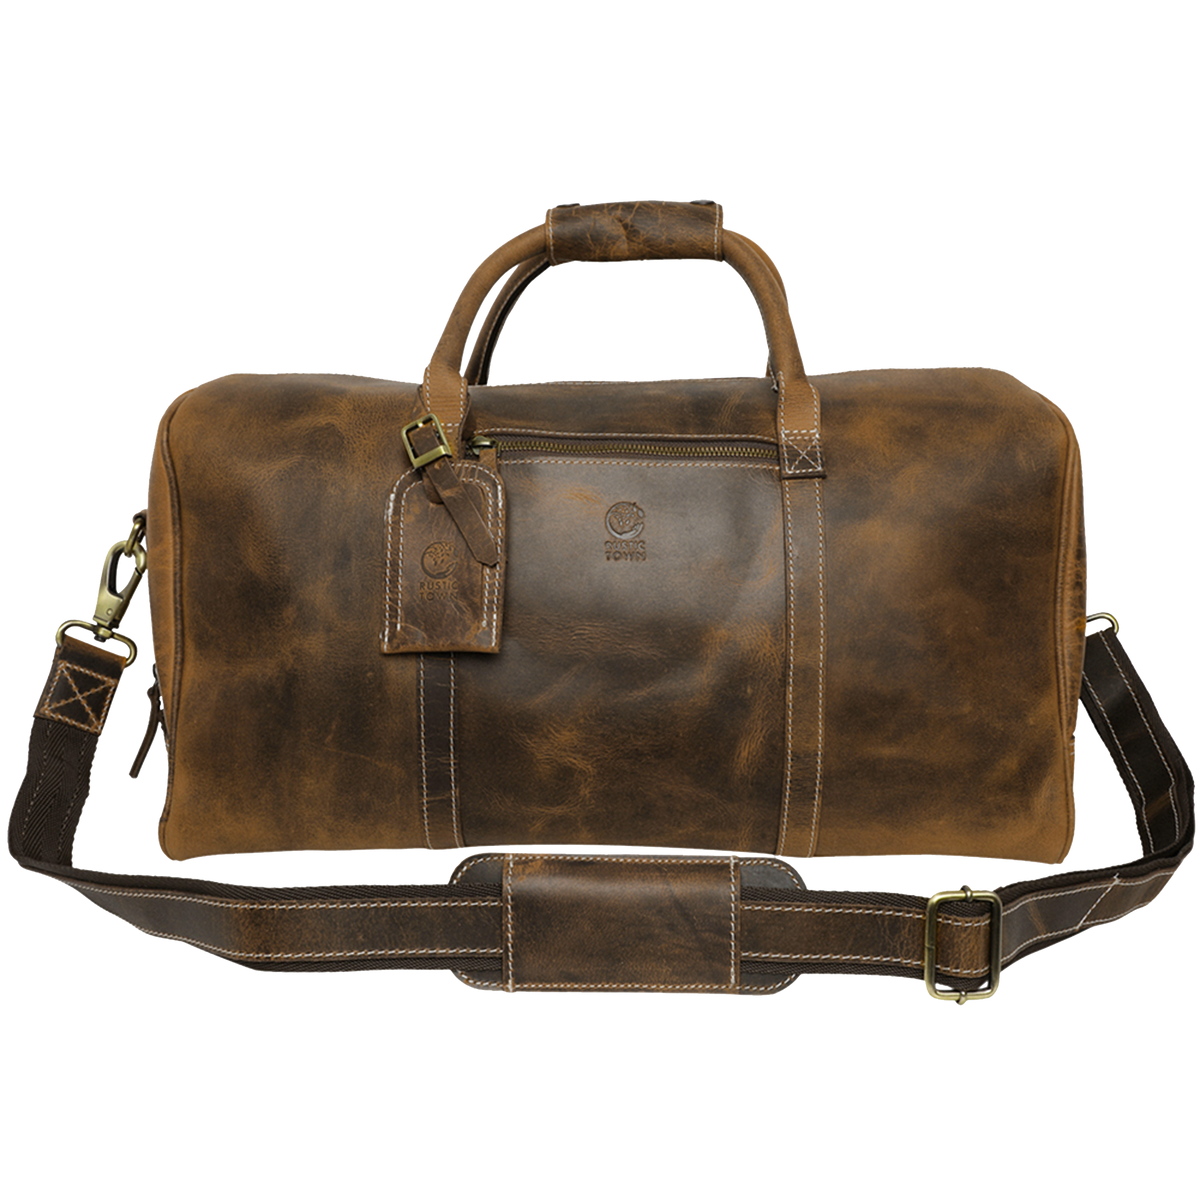 Handmade Leather Travel Duffel Bag - Airplane Underseat Carry On Bags by  Rustic Town